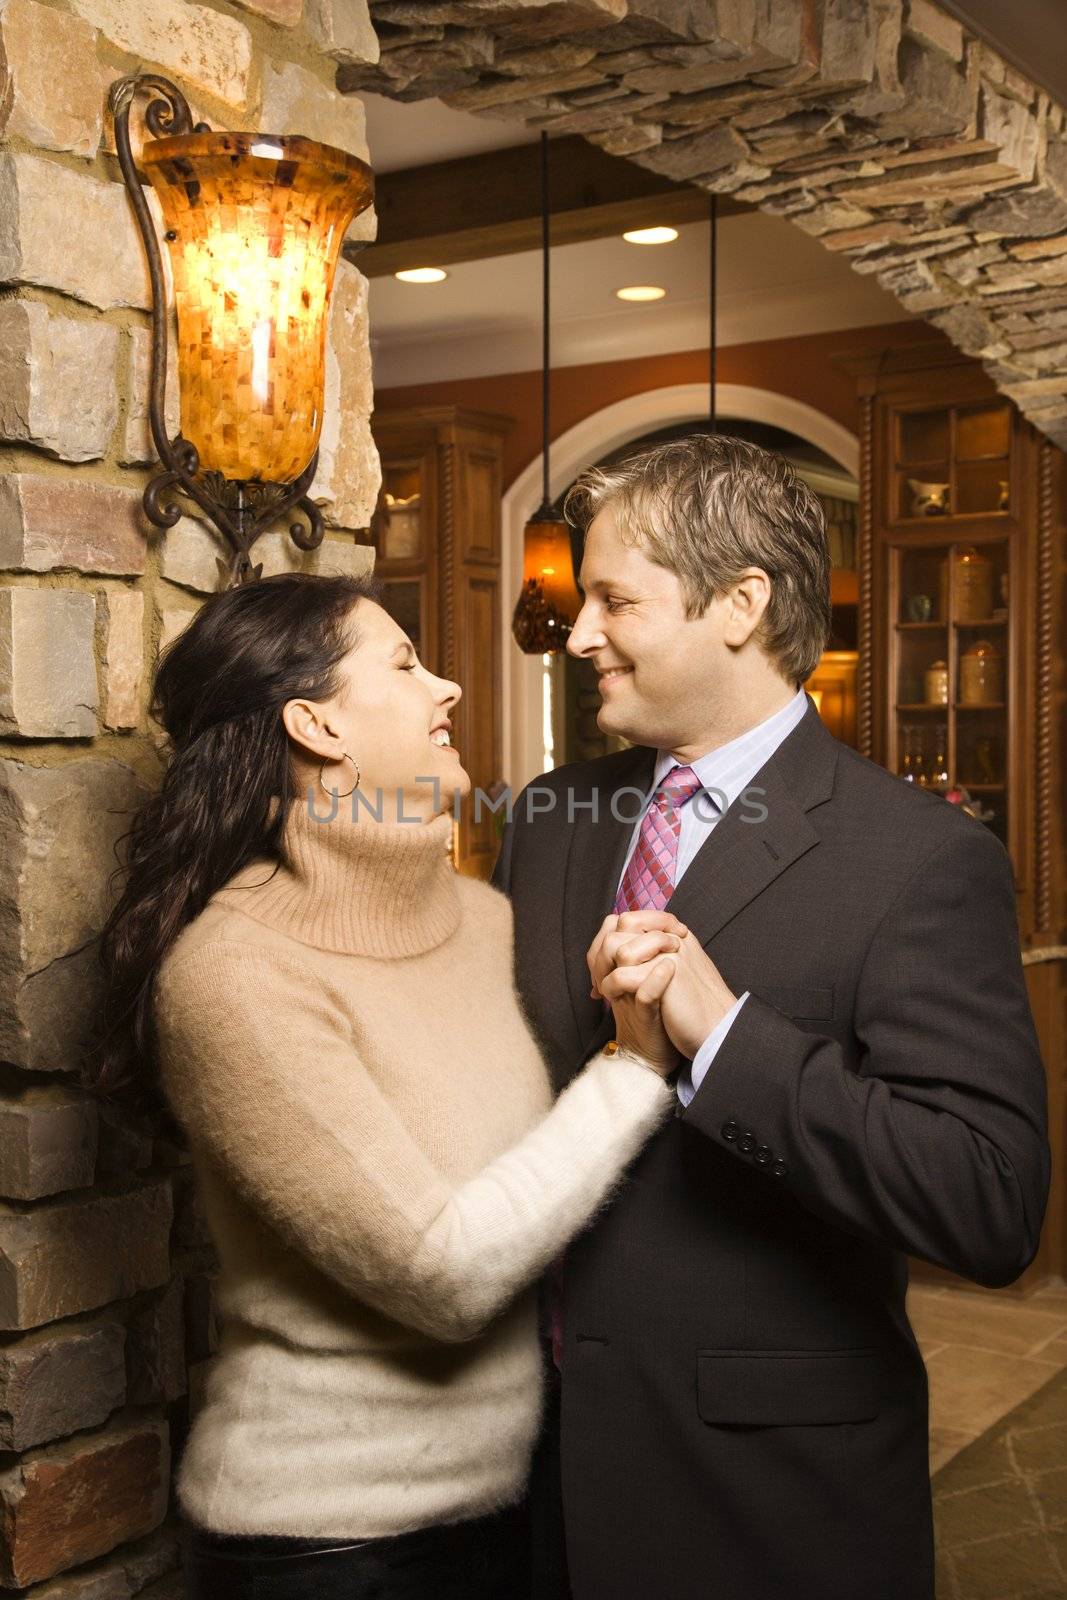 Caucasian woman and Caucasian man holding hands looking at each other and smiling.